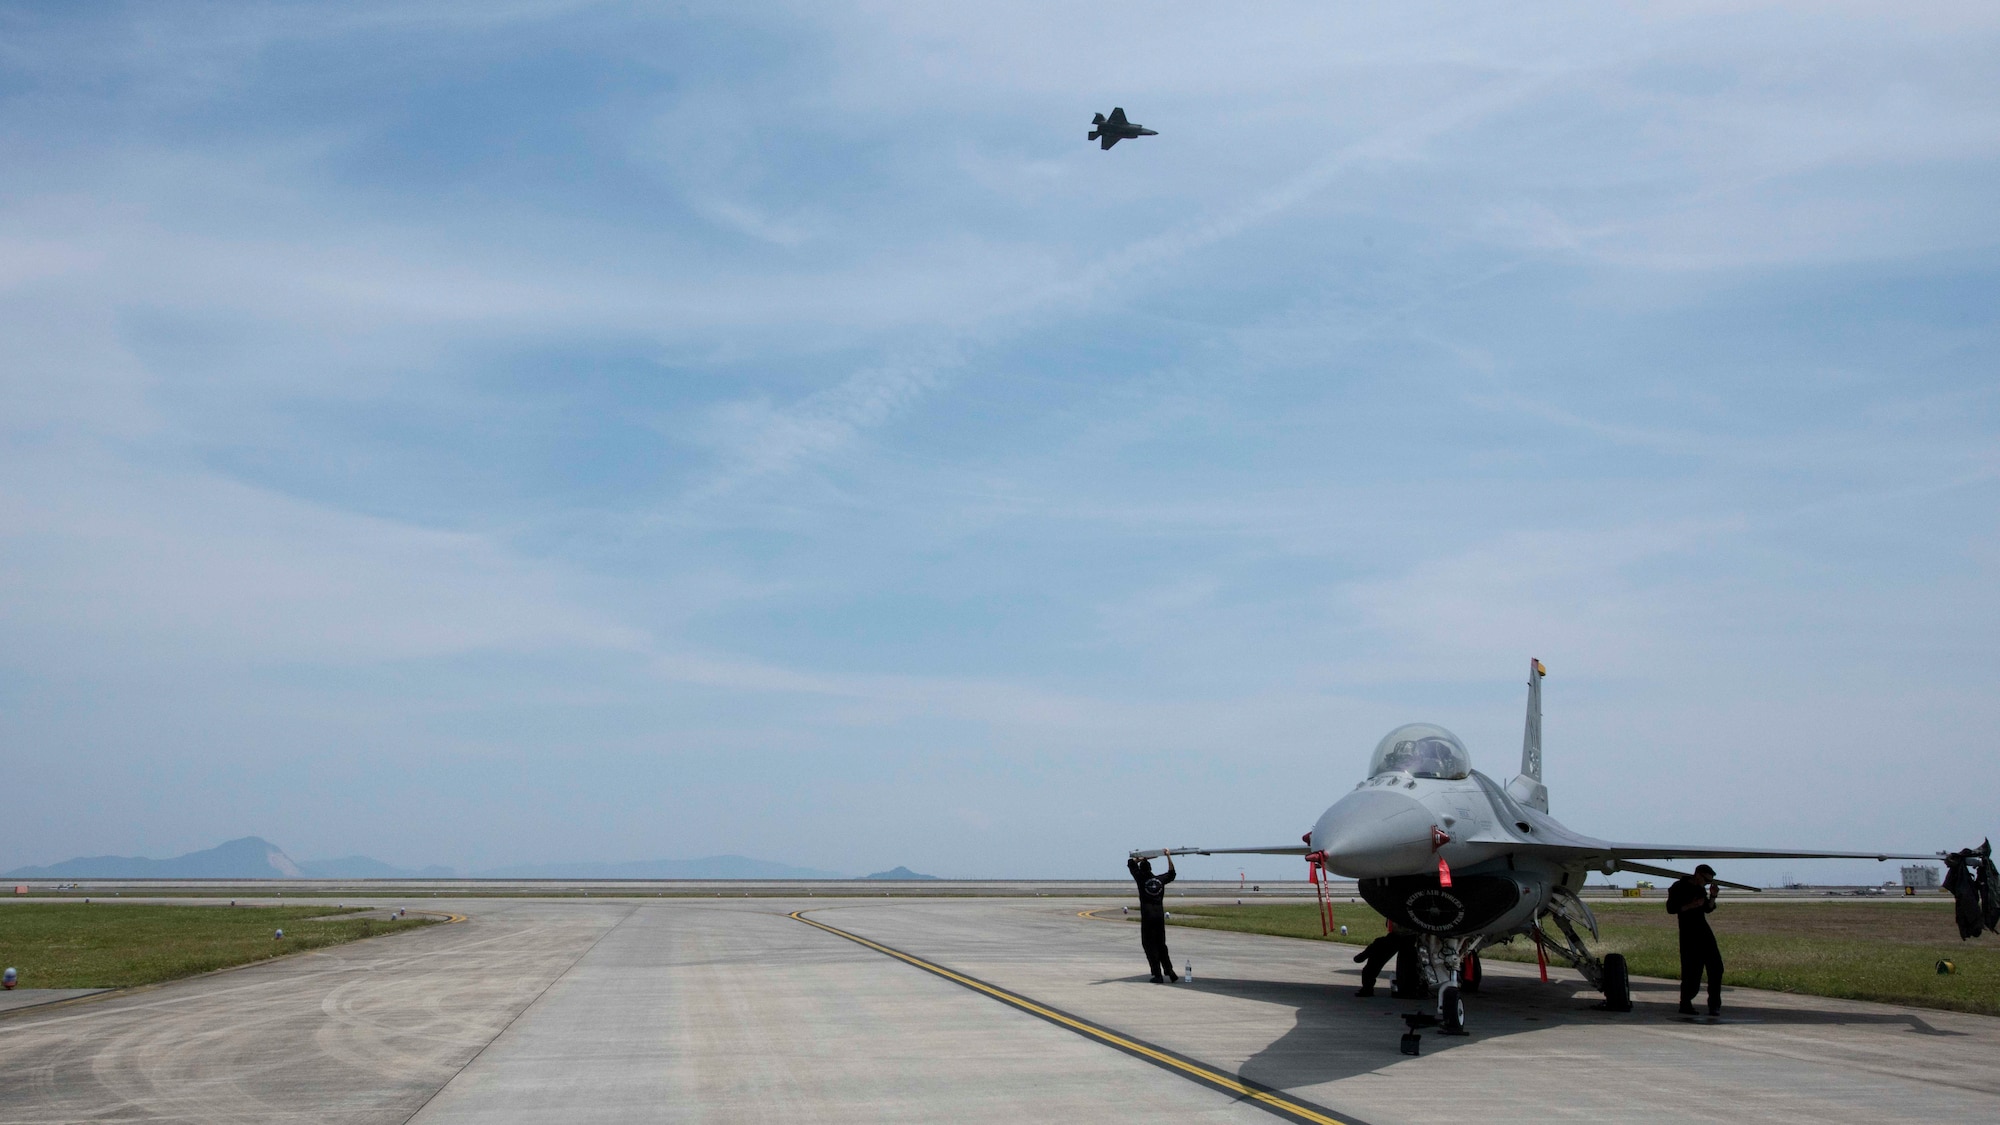 An F-35B Lighting II demonstration aircraft flies across the sky, as an F-16 Fighting Falcon sits on the runaway at the 43rd Japan Maritime Self-Defense Force – Marine Corps Air Station Iwakuni Friendship Day 2019 at MCAS Iwakuni, Japan, May 5, 2019. This event provides dozens of performances and attractions by American and Japanese members to showcase their aviation ability and talent. (U.S. Air Force photo by Senior Airman Collette Brooks)